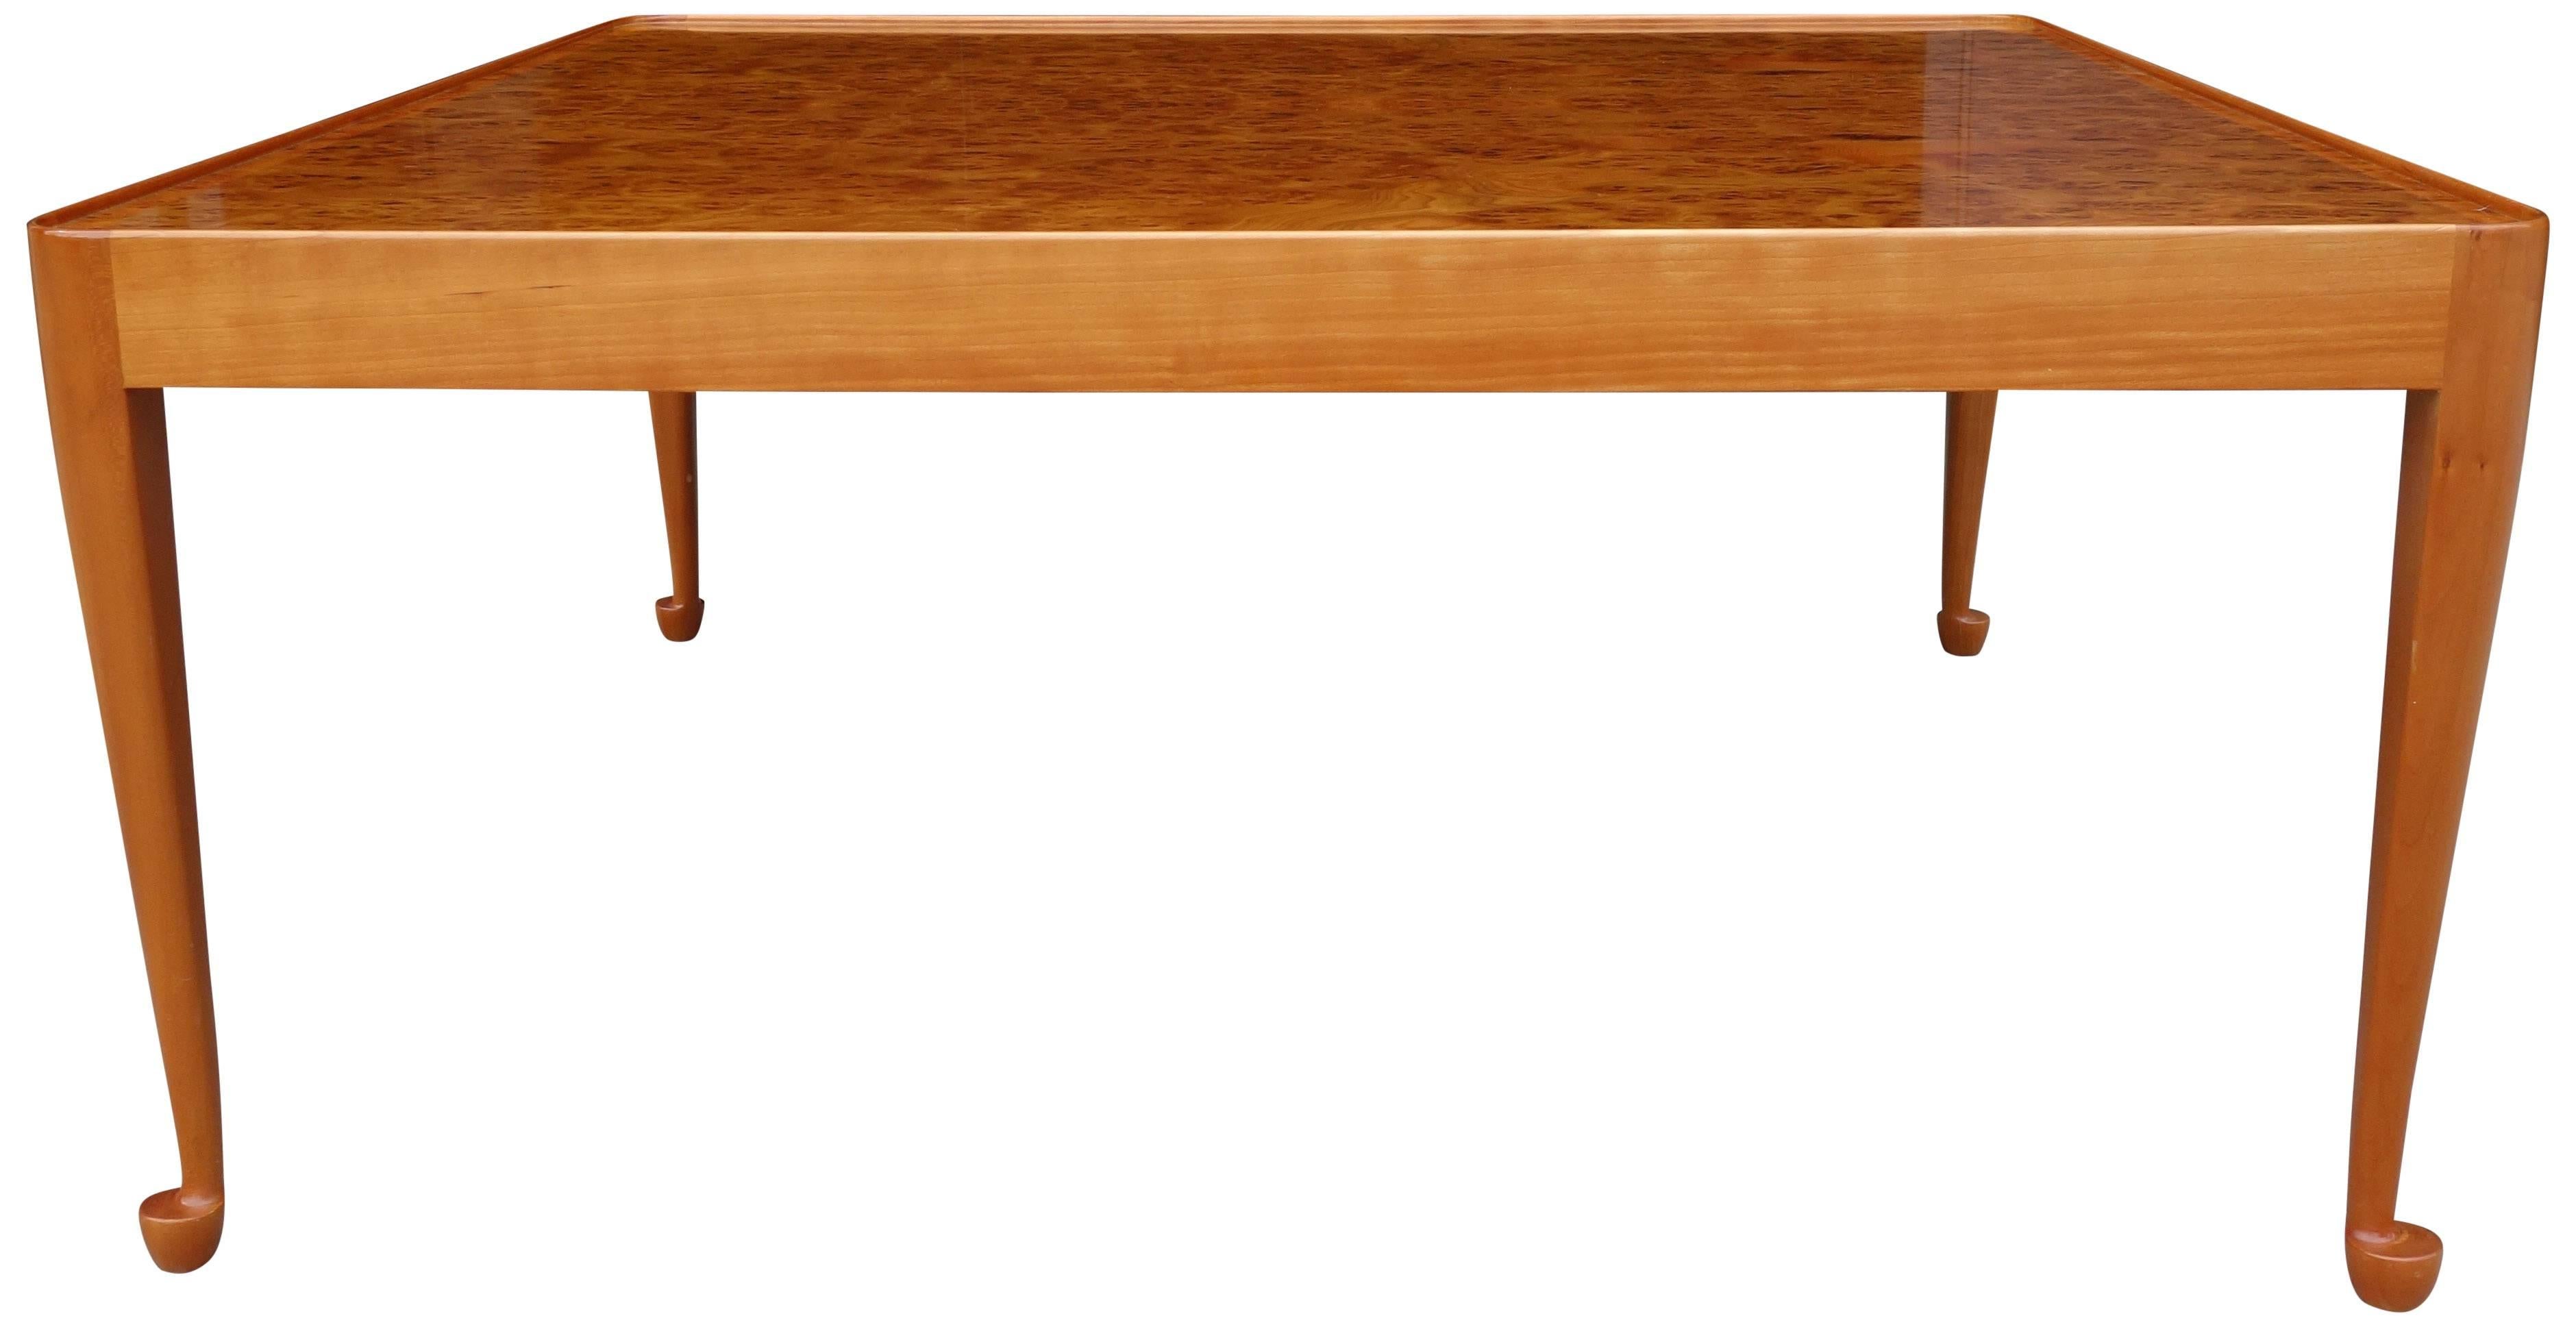 Swedish Exceptional Mid-Century Burl Wood Coffee Table by Josef Frank